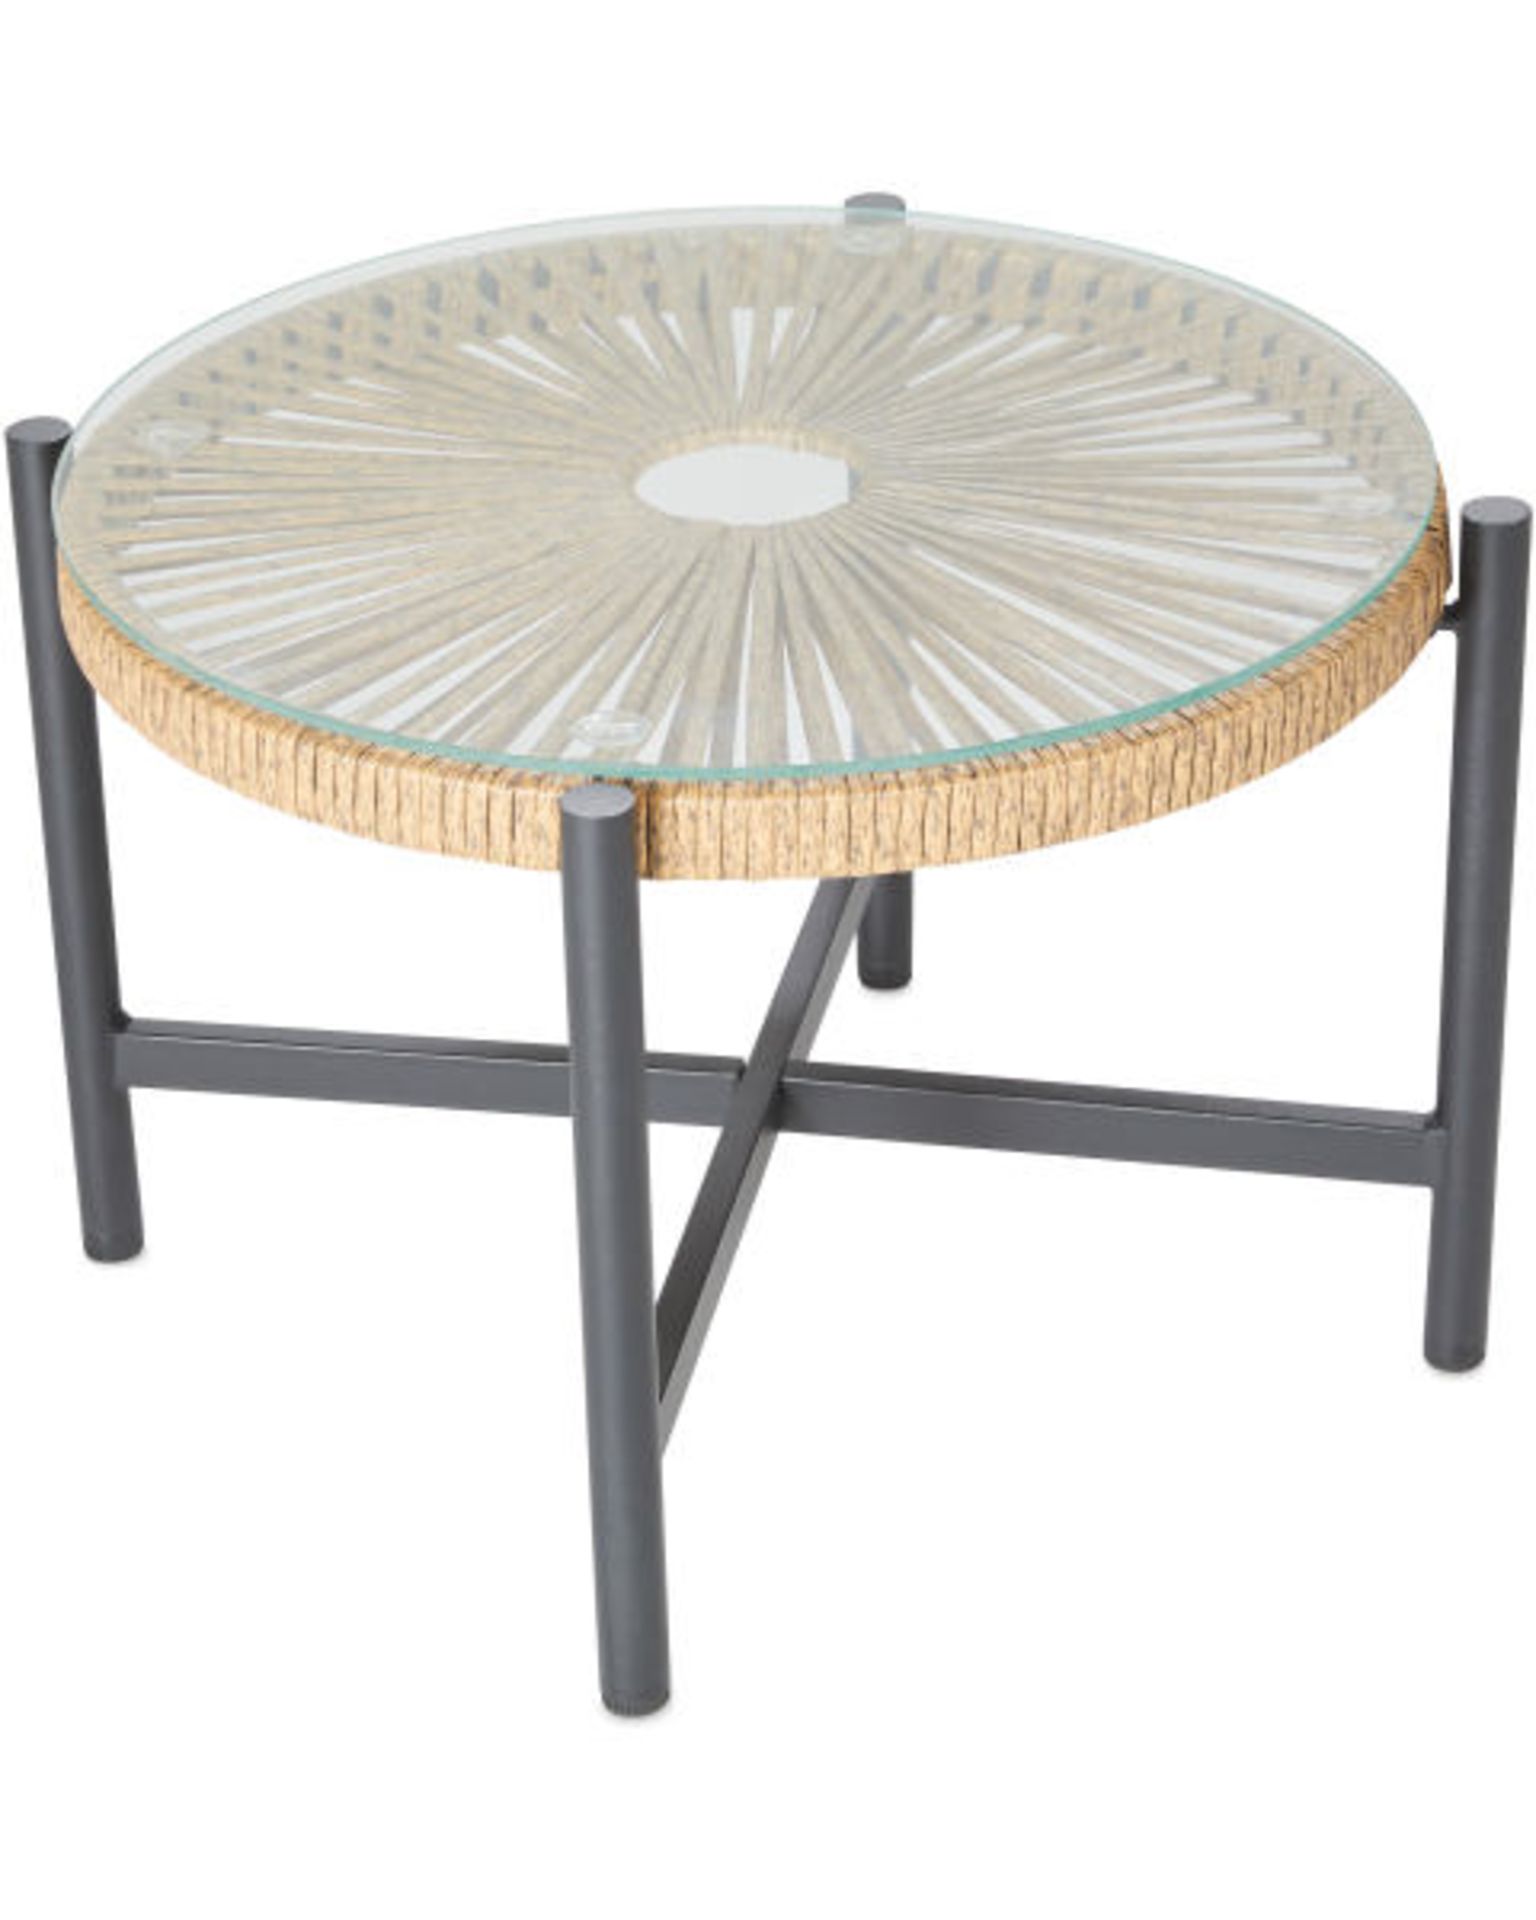 Luxury Petal Rattan Bistro Set. Transform your garden and create a space where you can relax with - Image 3 of 6